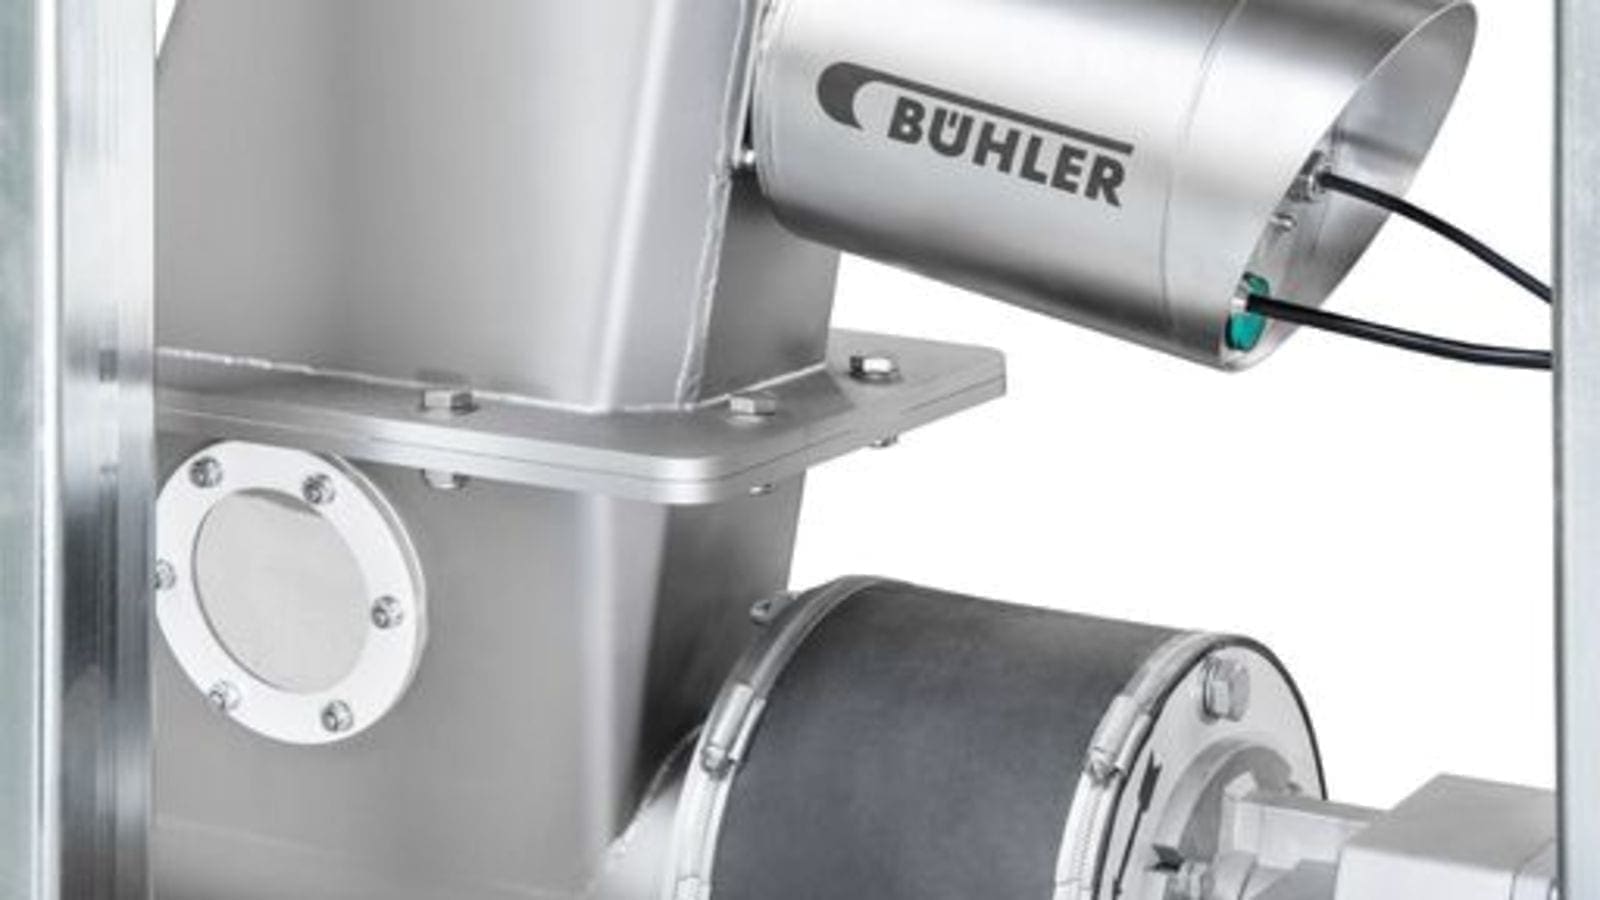 Bühler introduces online measurement to bolster consistency and efficiency in maize milling